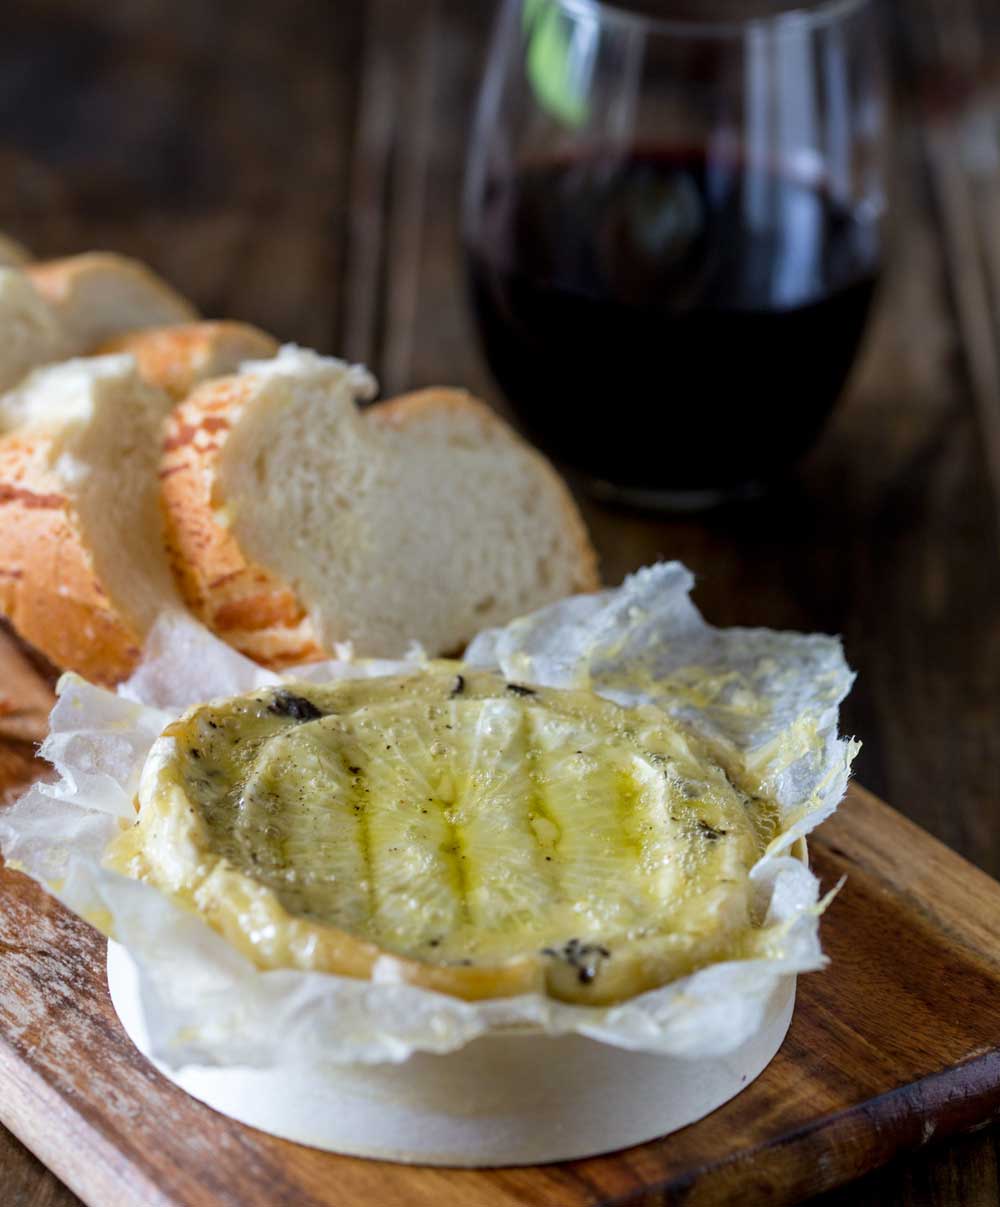 Creamy brie, enhanced with the earthy delicious flavours of black truffle all baked to oozing delicious perfection! Seriously this Baked Black Truffle Stuffed Brie is decadence and heaven on a plate!